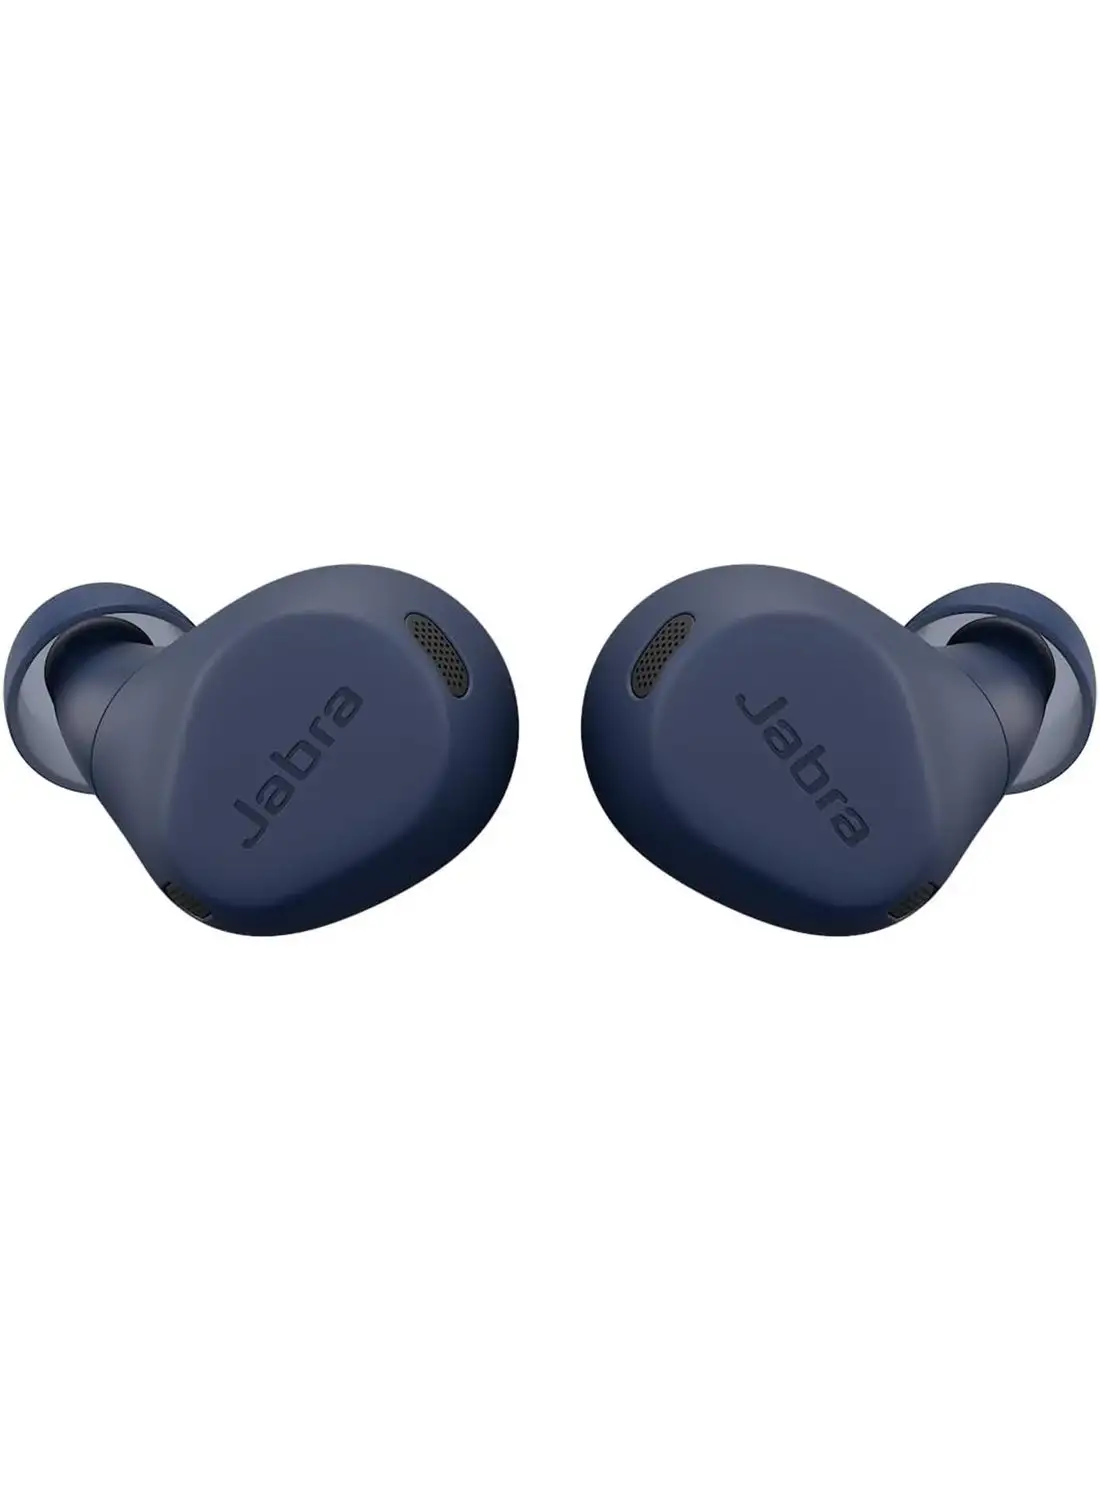 Jabra Elite 8 Active True Wireless – Bluetooth Sports Earbuds With Secure In-Ear Fit For All-Day Comfort - Military Grade Durability, Noise Cancellation, Dolby Surround Sound Navy